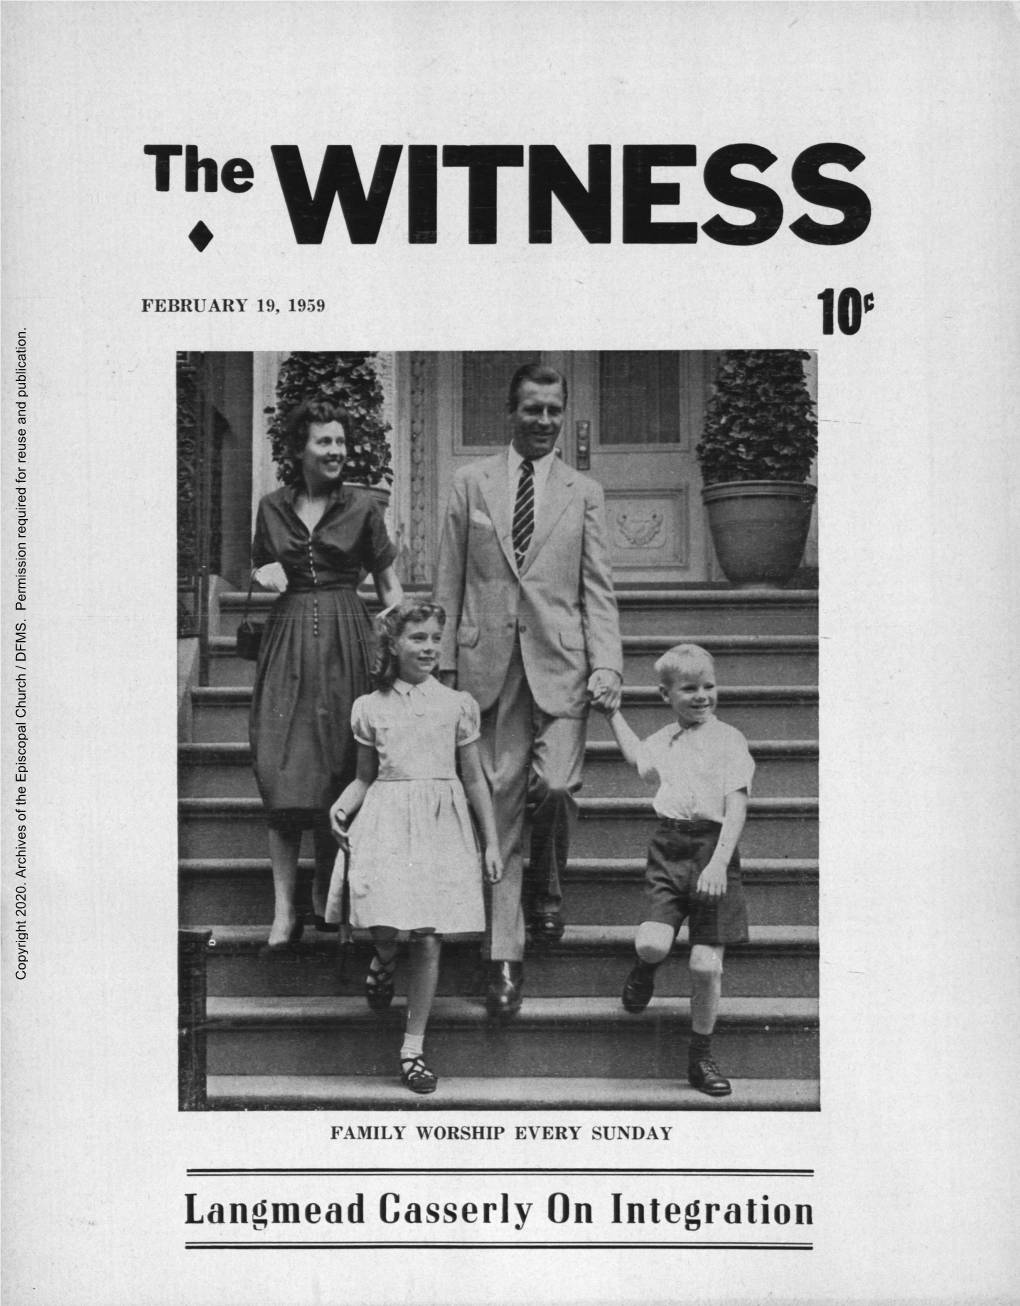 1959 the Witness, Vol. 46, No. 4. February 19, 1959